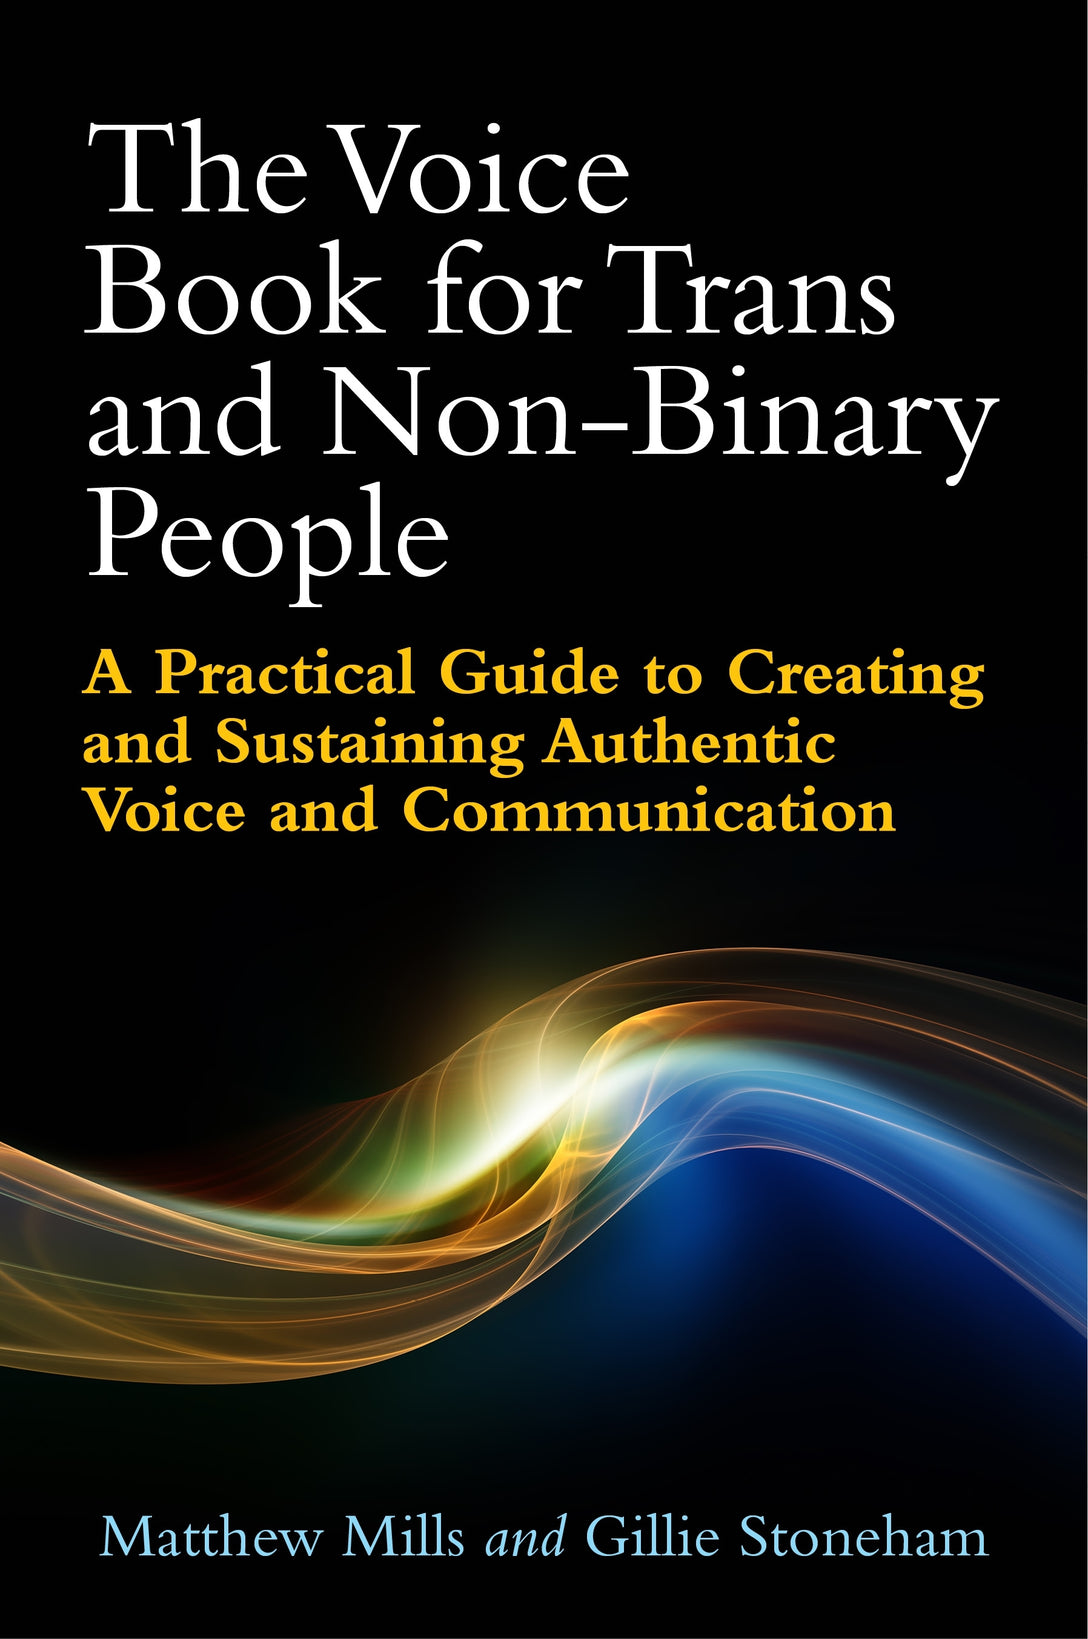 The Voice Book for Trans and Non-Binary People by Matthew Mills, Gillie Stoneham, Philip Robinson, Matthew Hotchkiss